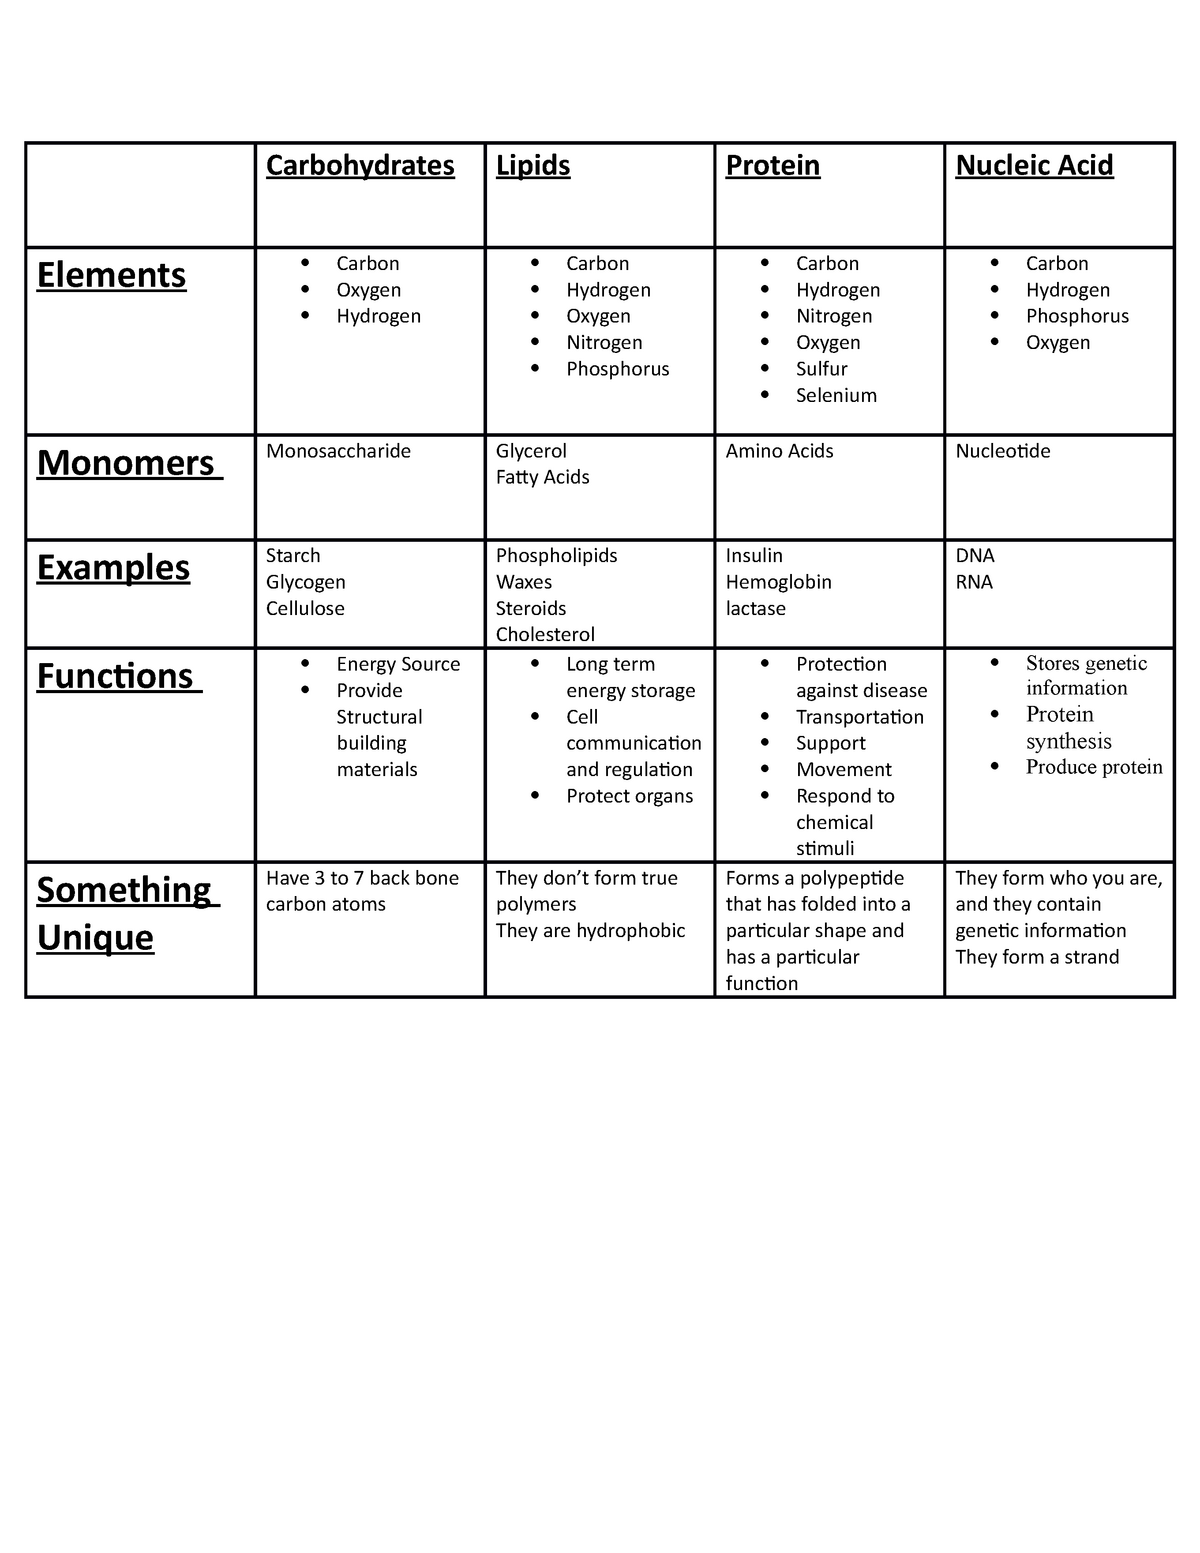 Macromolecules chart Lecture notes A Carbohydrates Elements Carbon